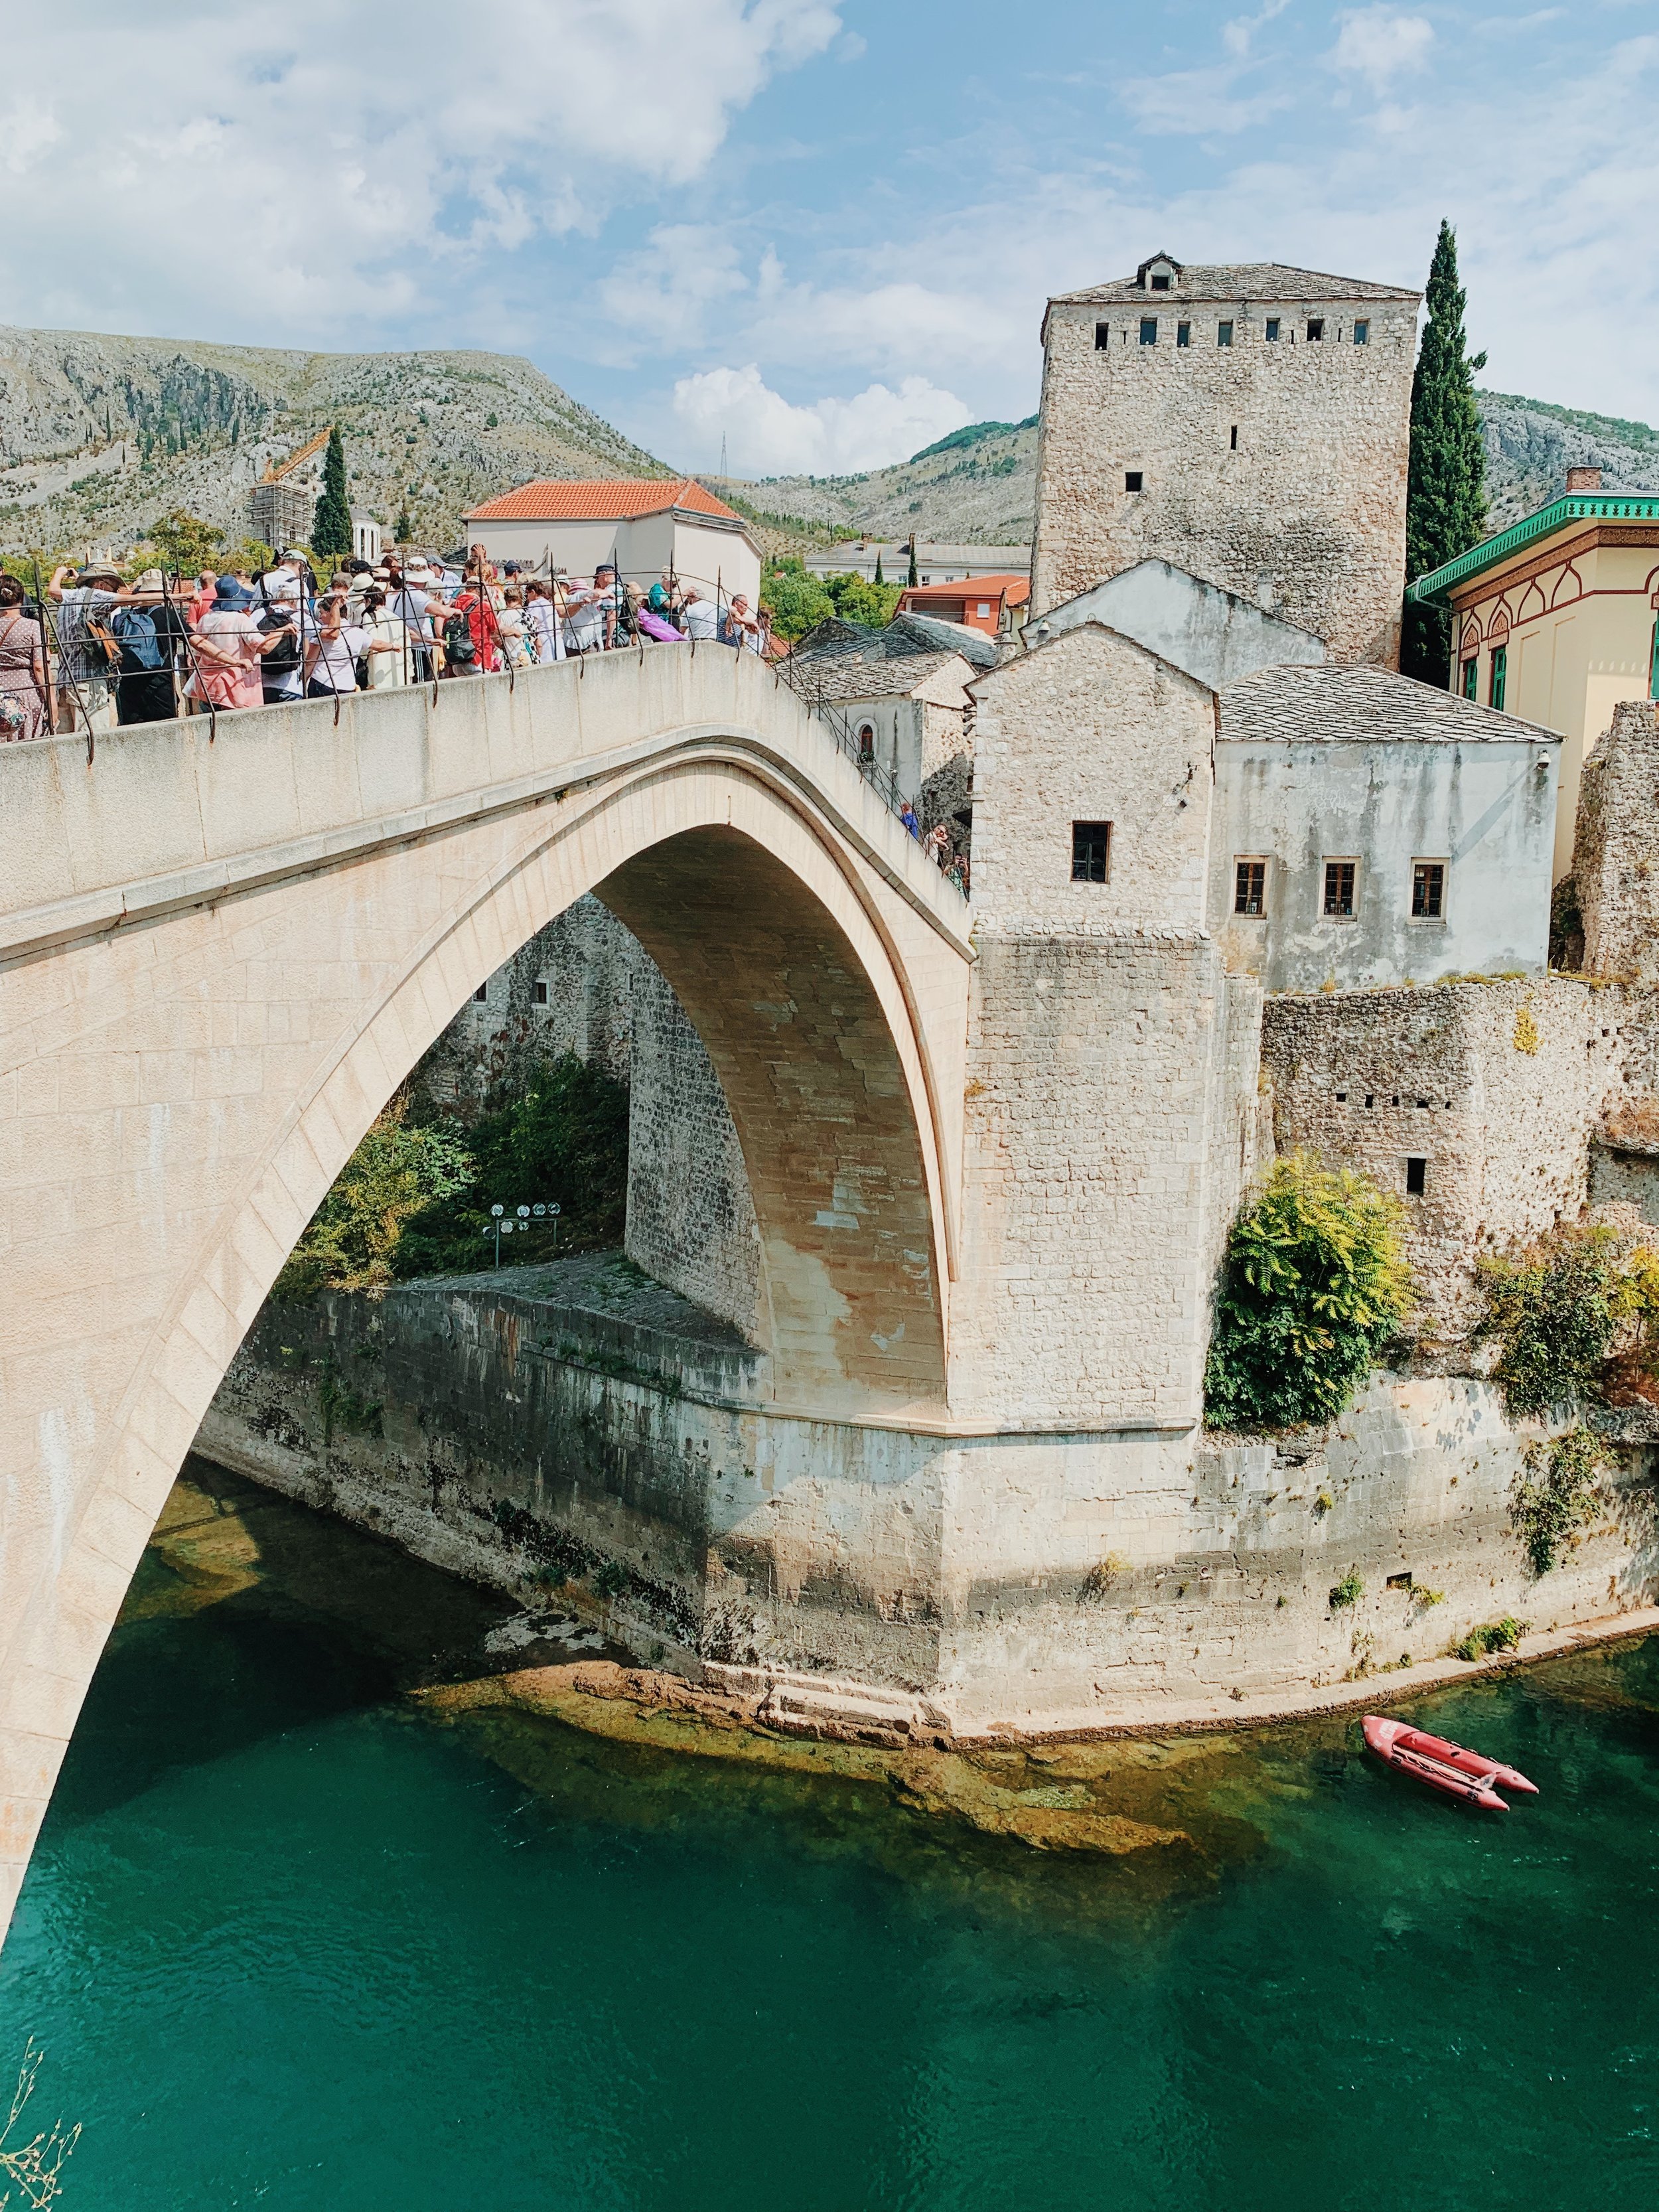 Things to do in Mostar: The Best day trip from Croatia